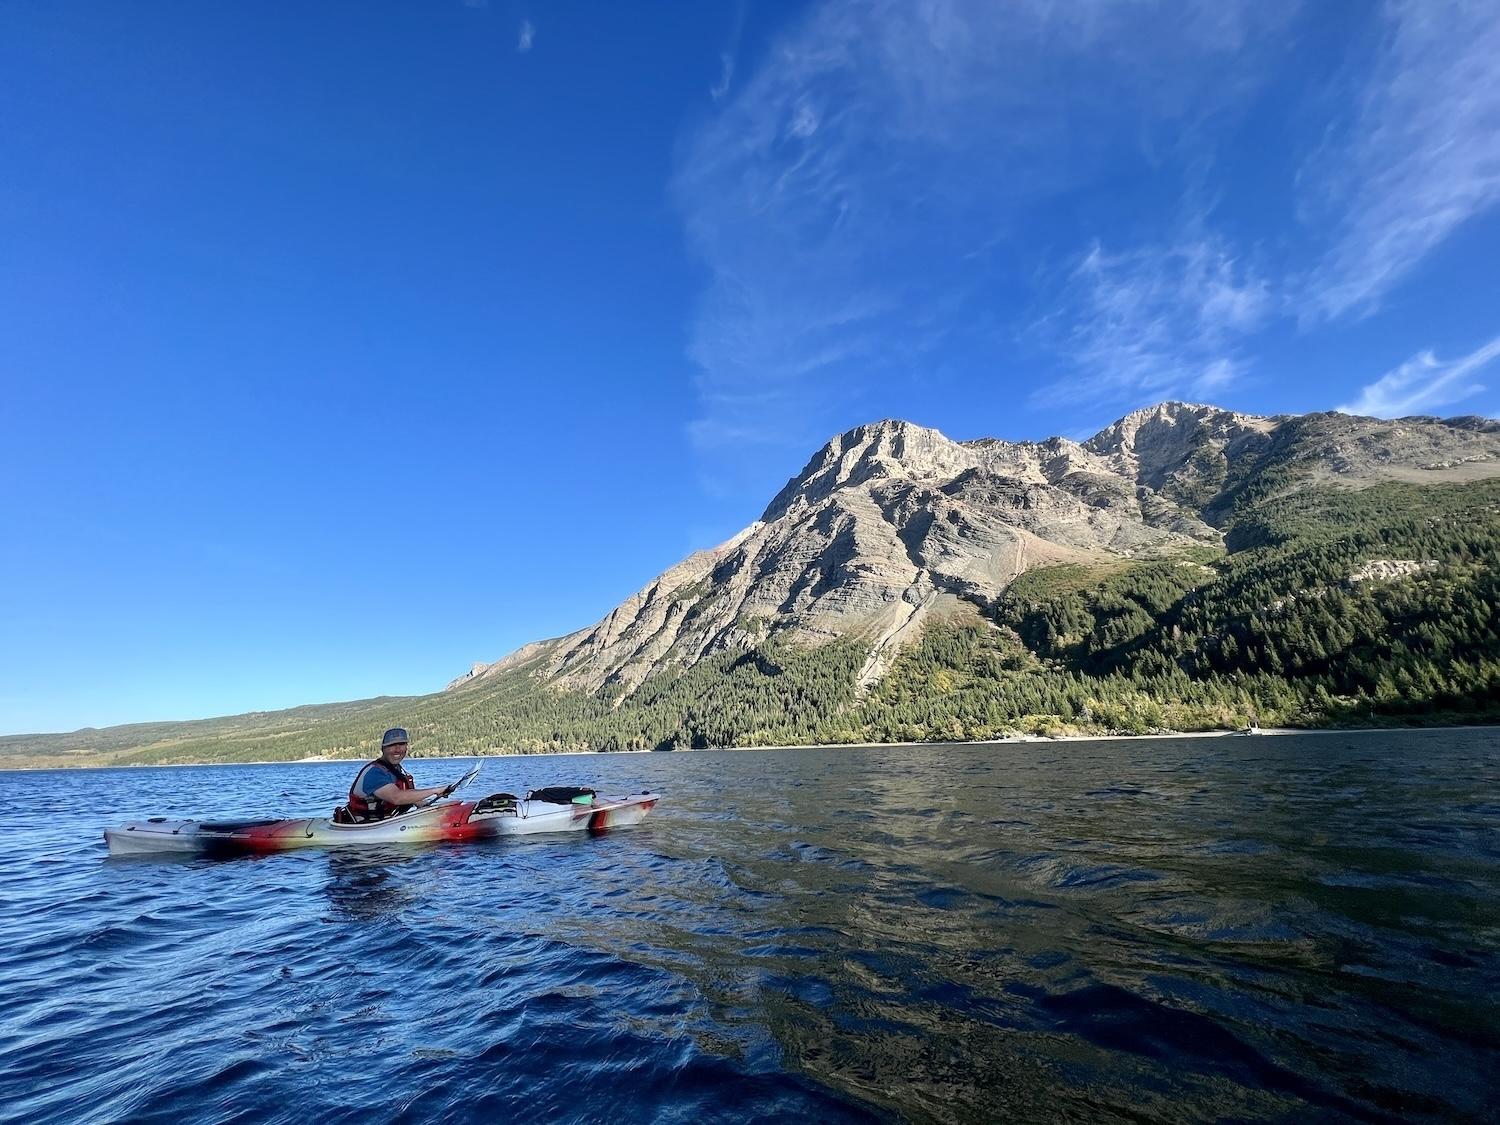 Rental businesses operating in Waterton Lakes National Park must take a short course on aquatic invasive species to launch non-motorized watercraft in 2024.